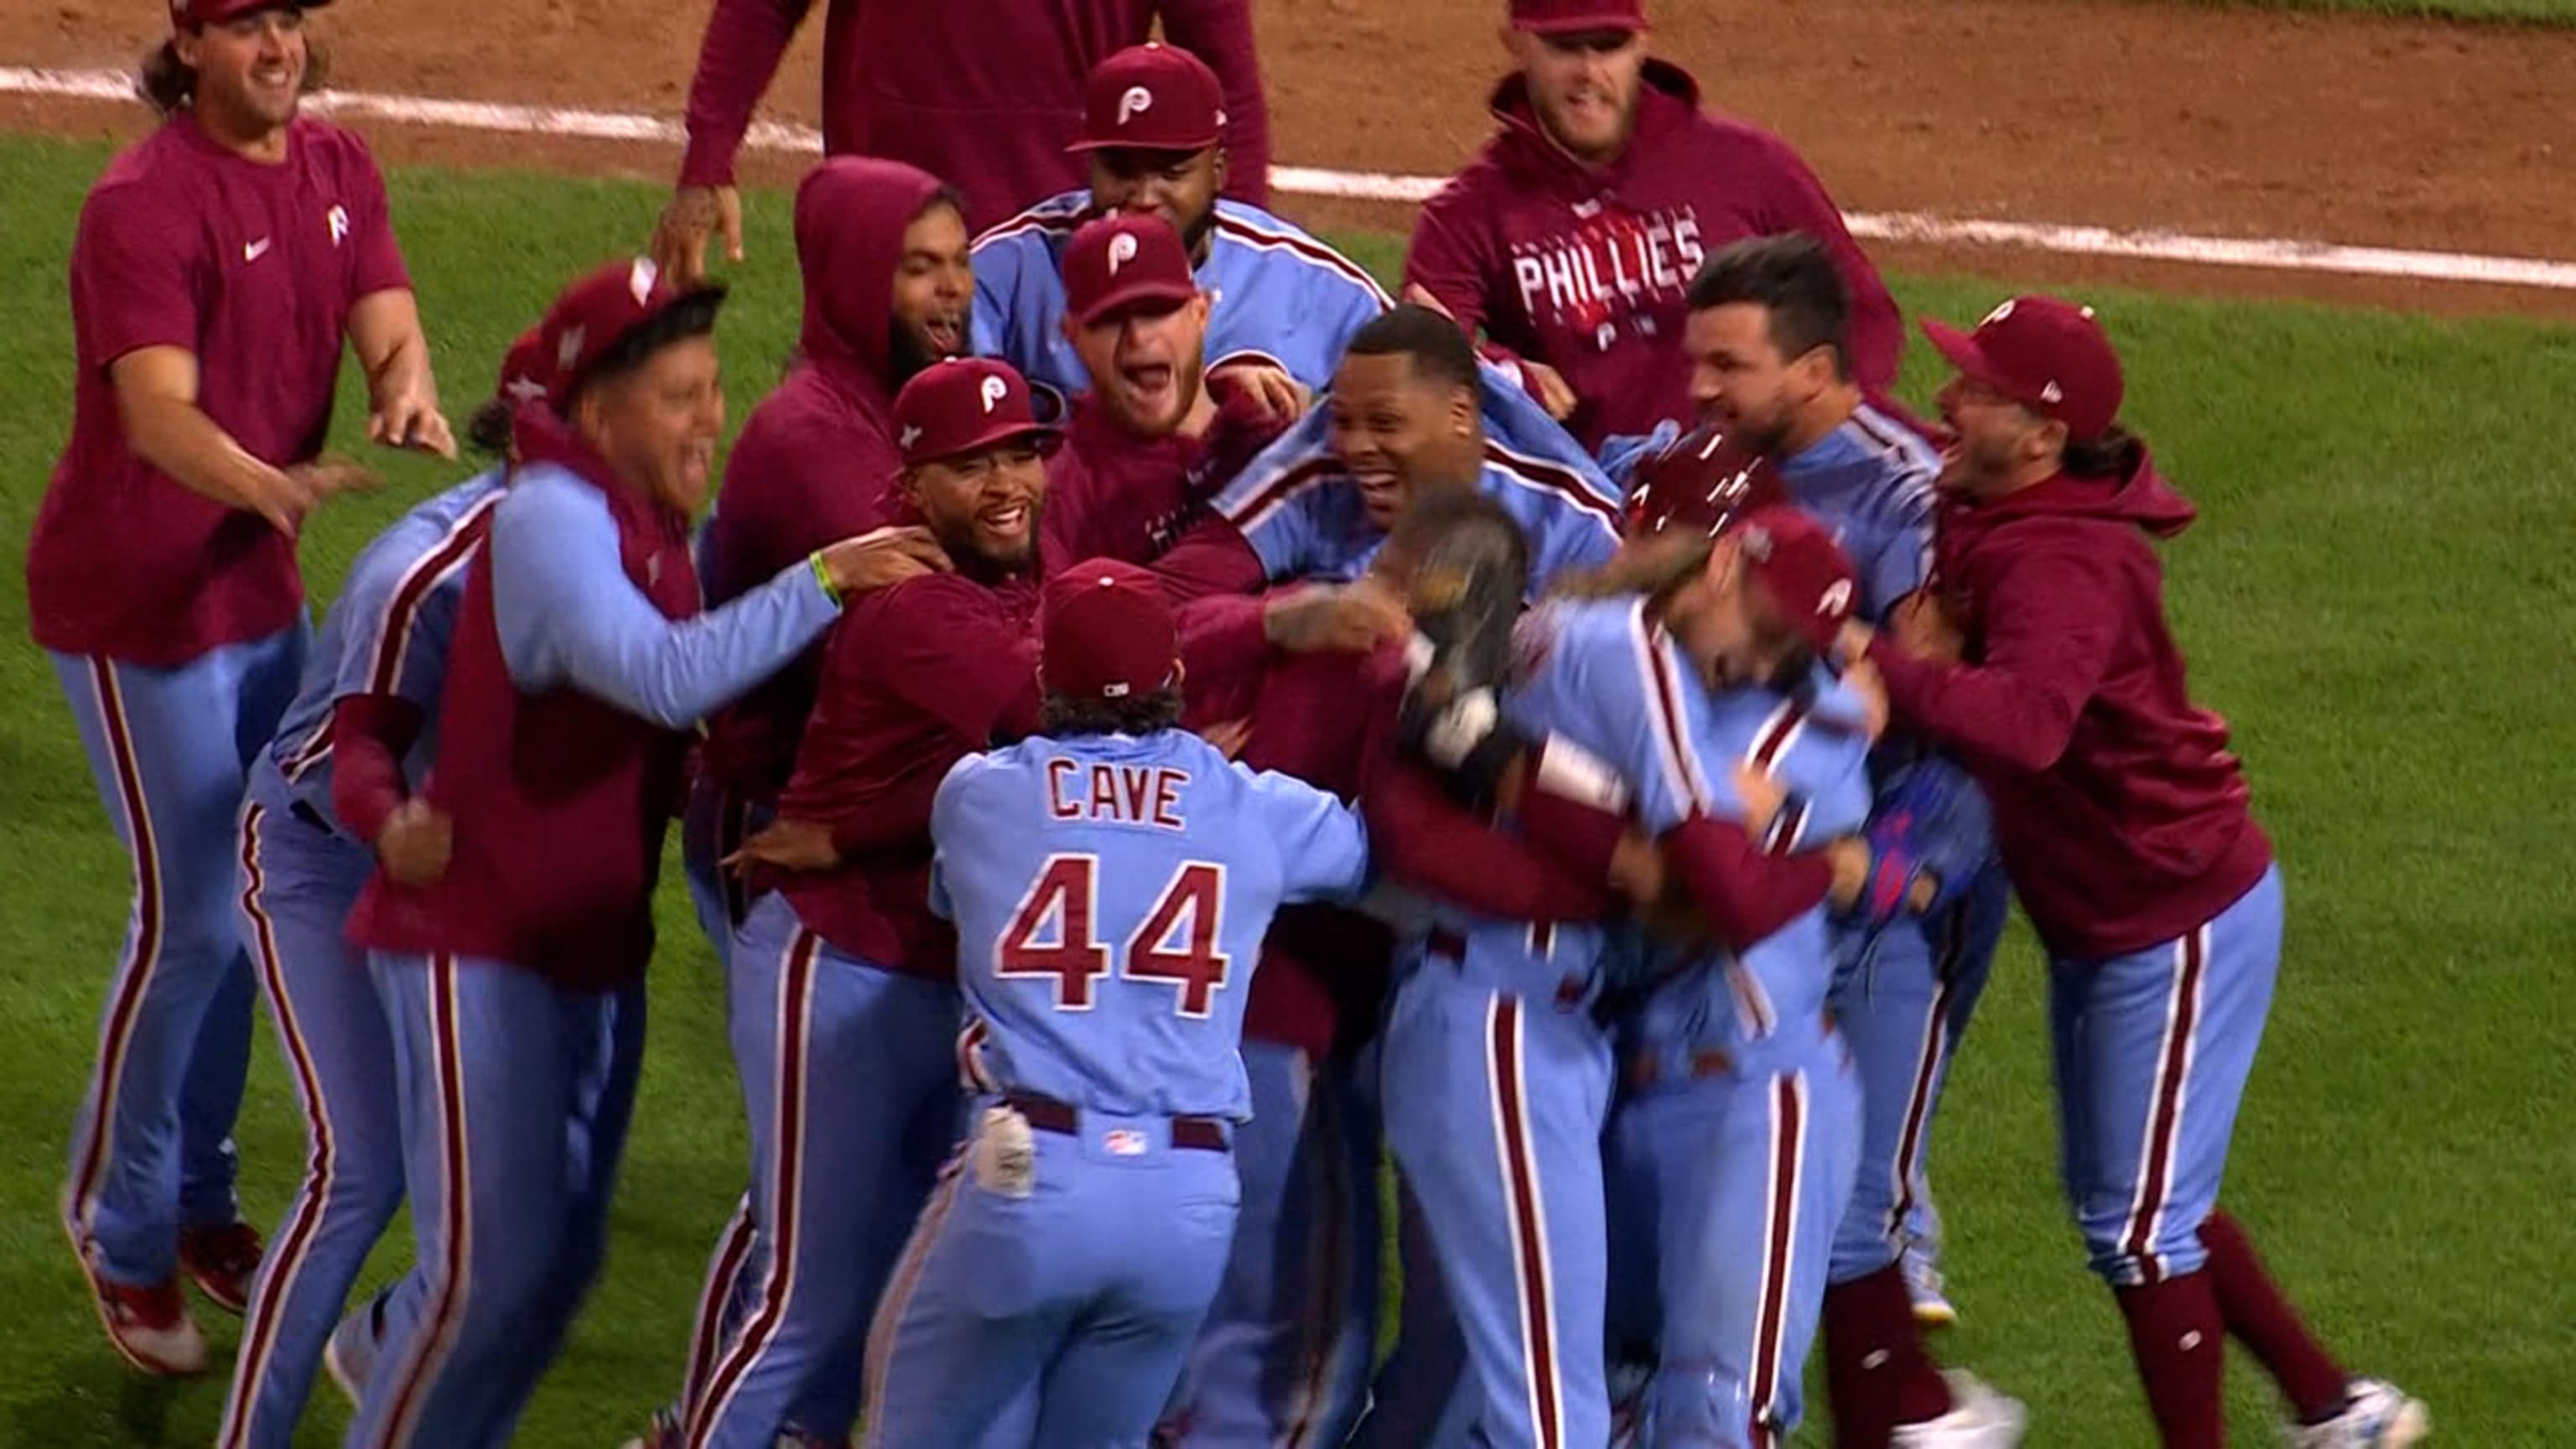 Philadelphia Phillies clinch NLCS win, will advance to the World